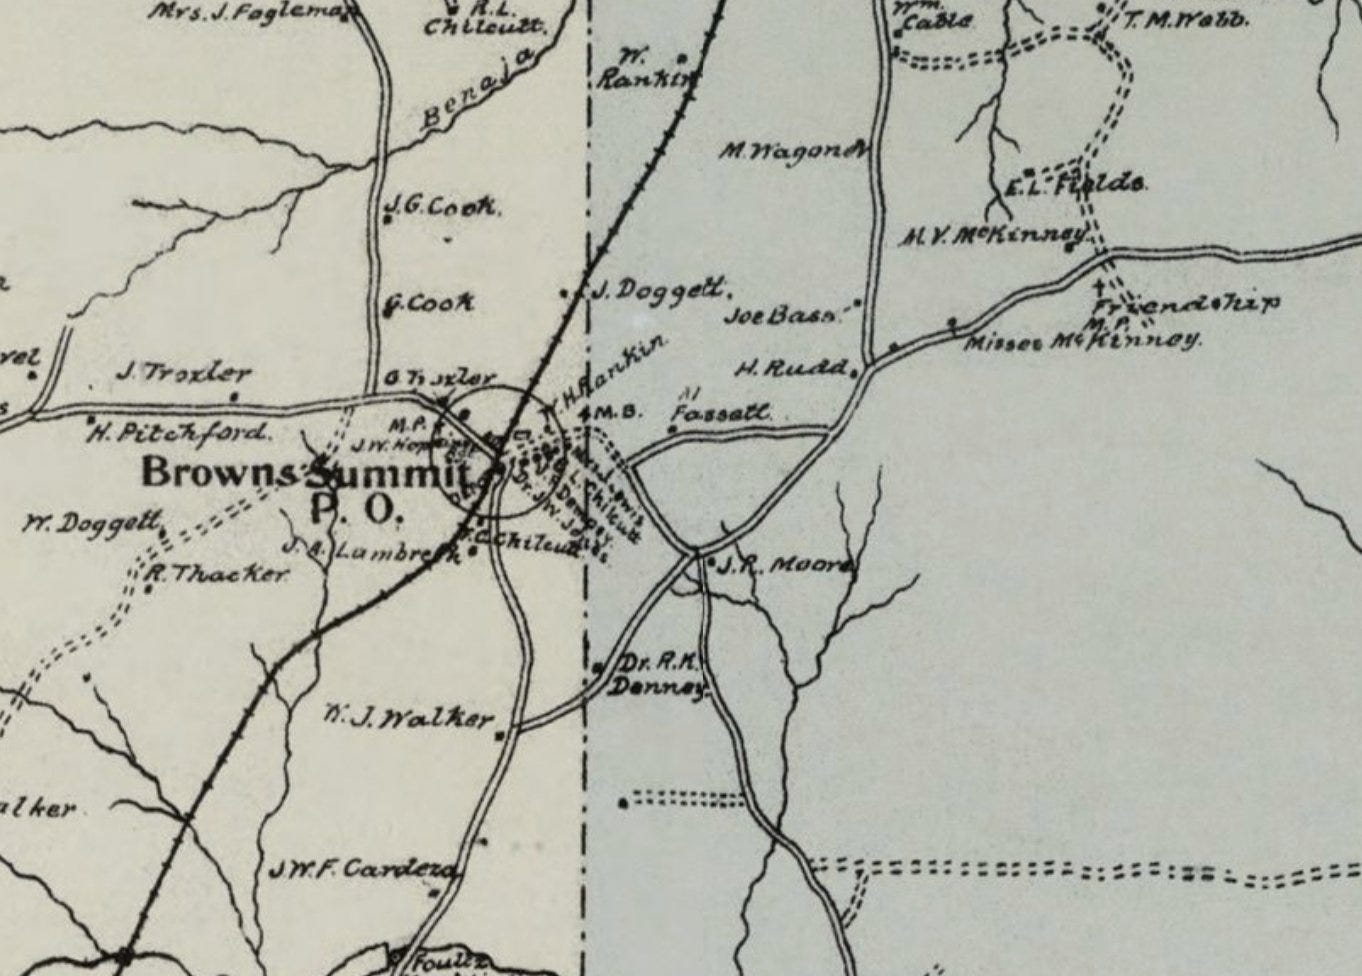 1895 map of Guilford County, denoting "Browns Summit"